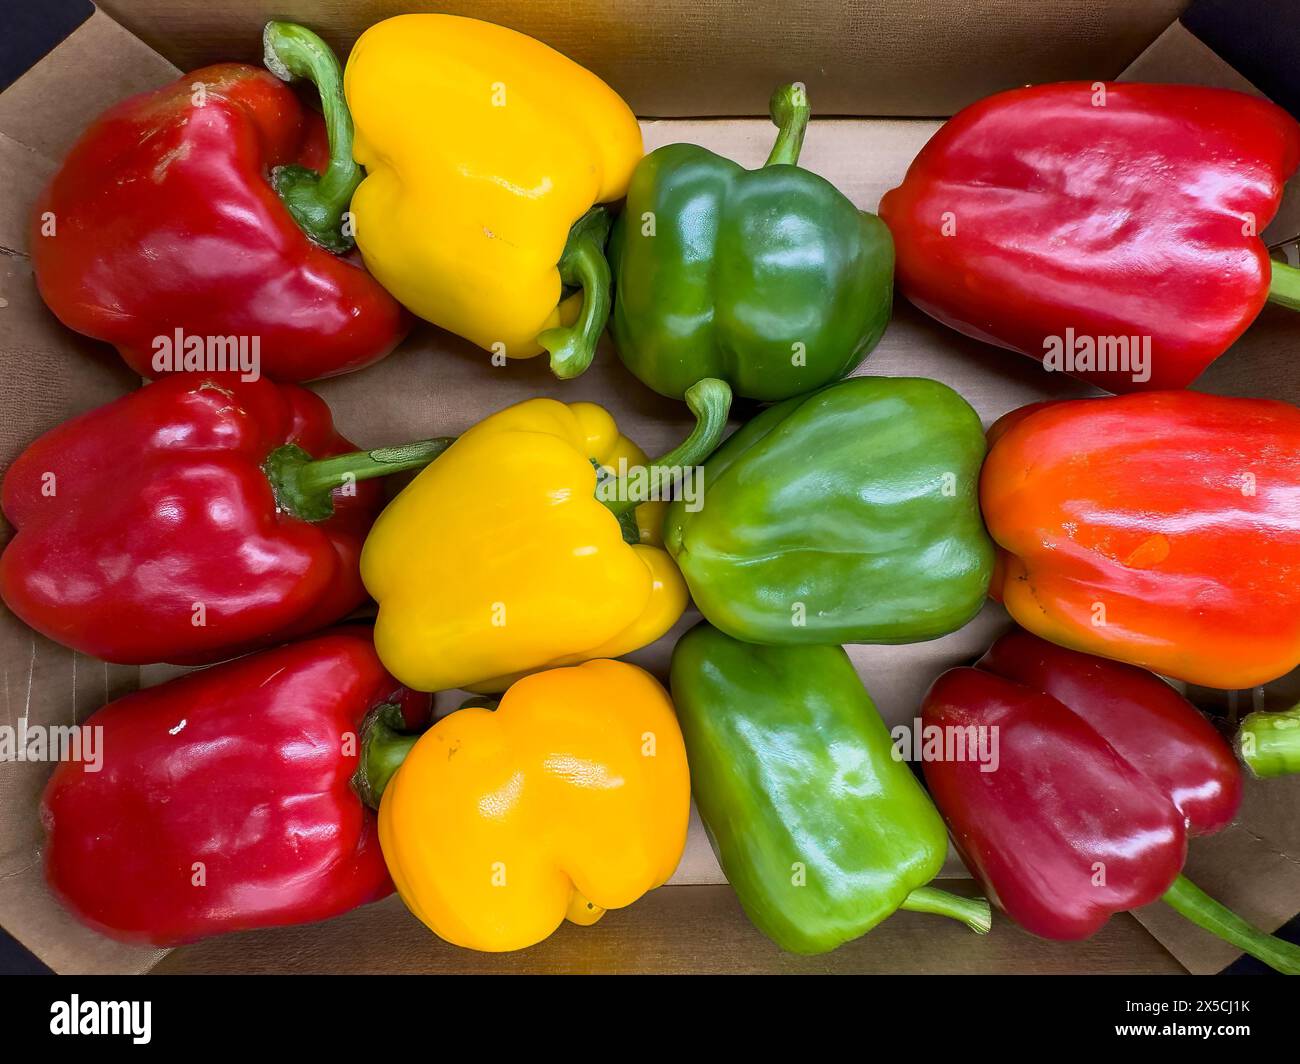 Vegetables red yellow green sweet pepper (Capsicum) Solanaceae in loose pieces Display by retail wholesale greengrocer supermarket environmentally Stock Photo